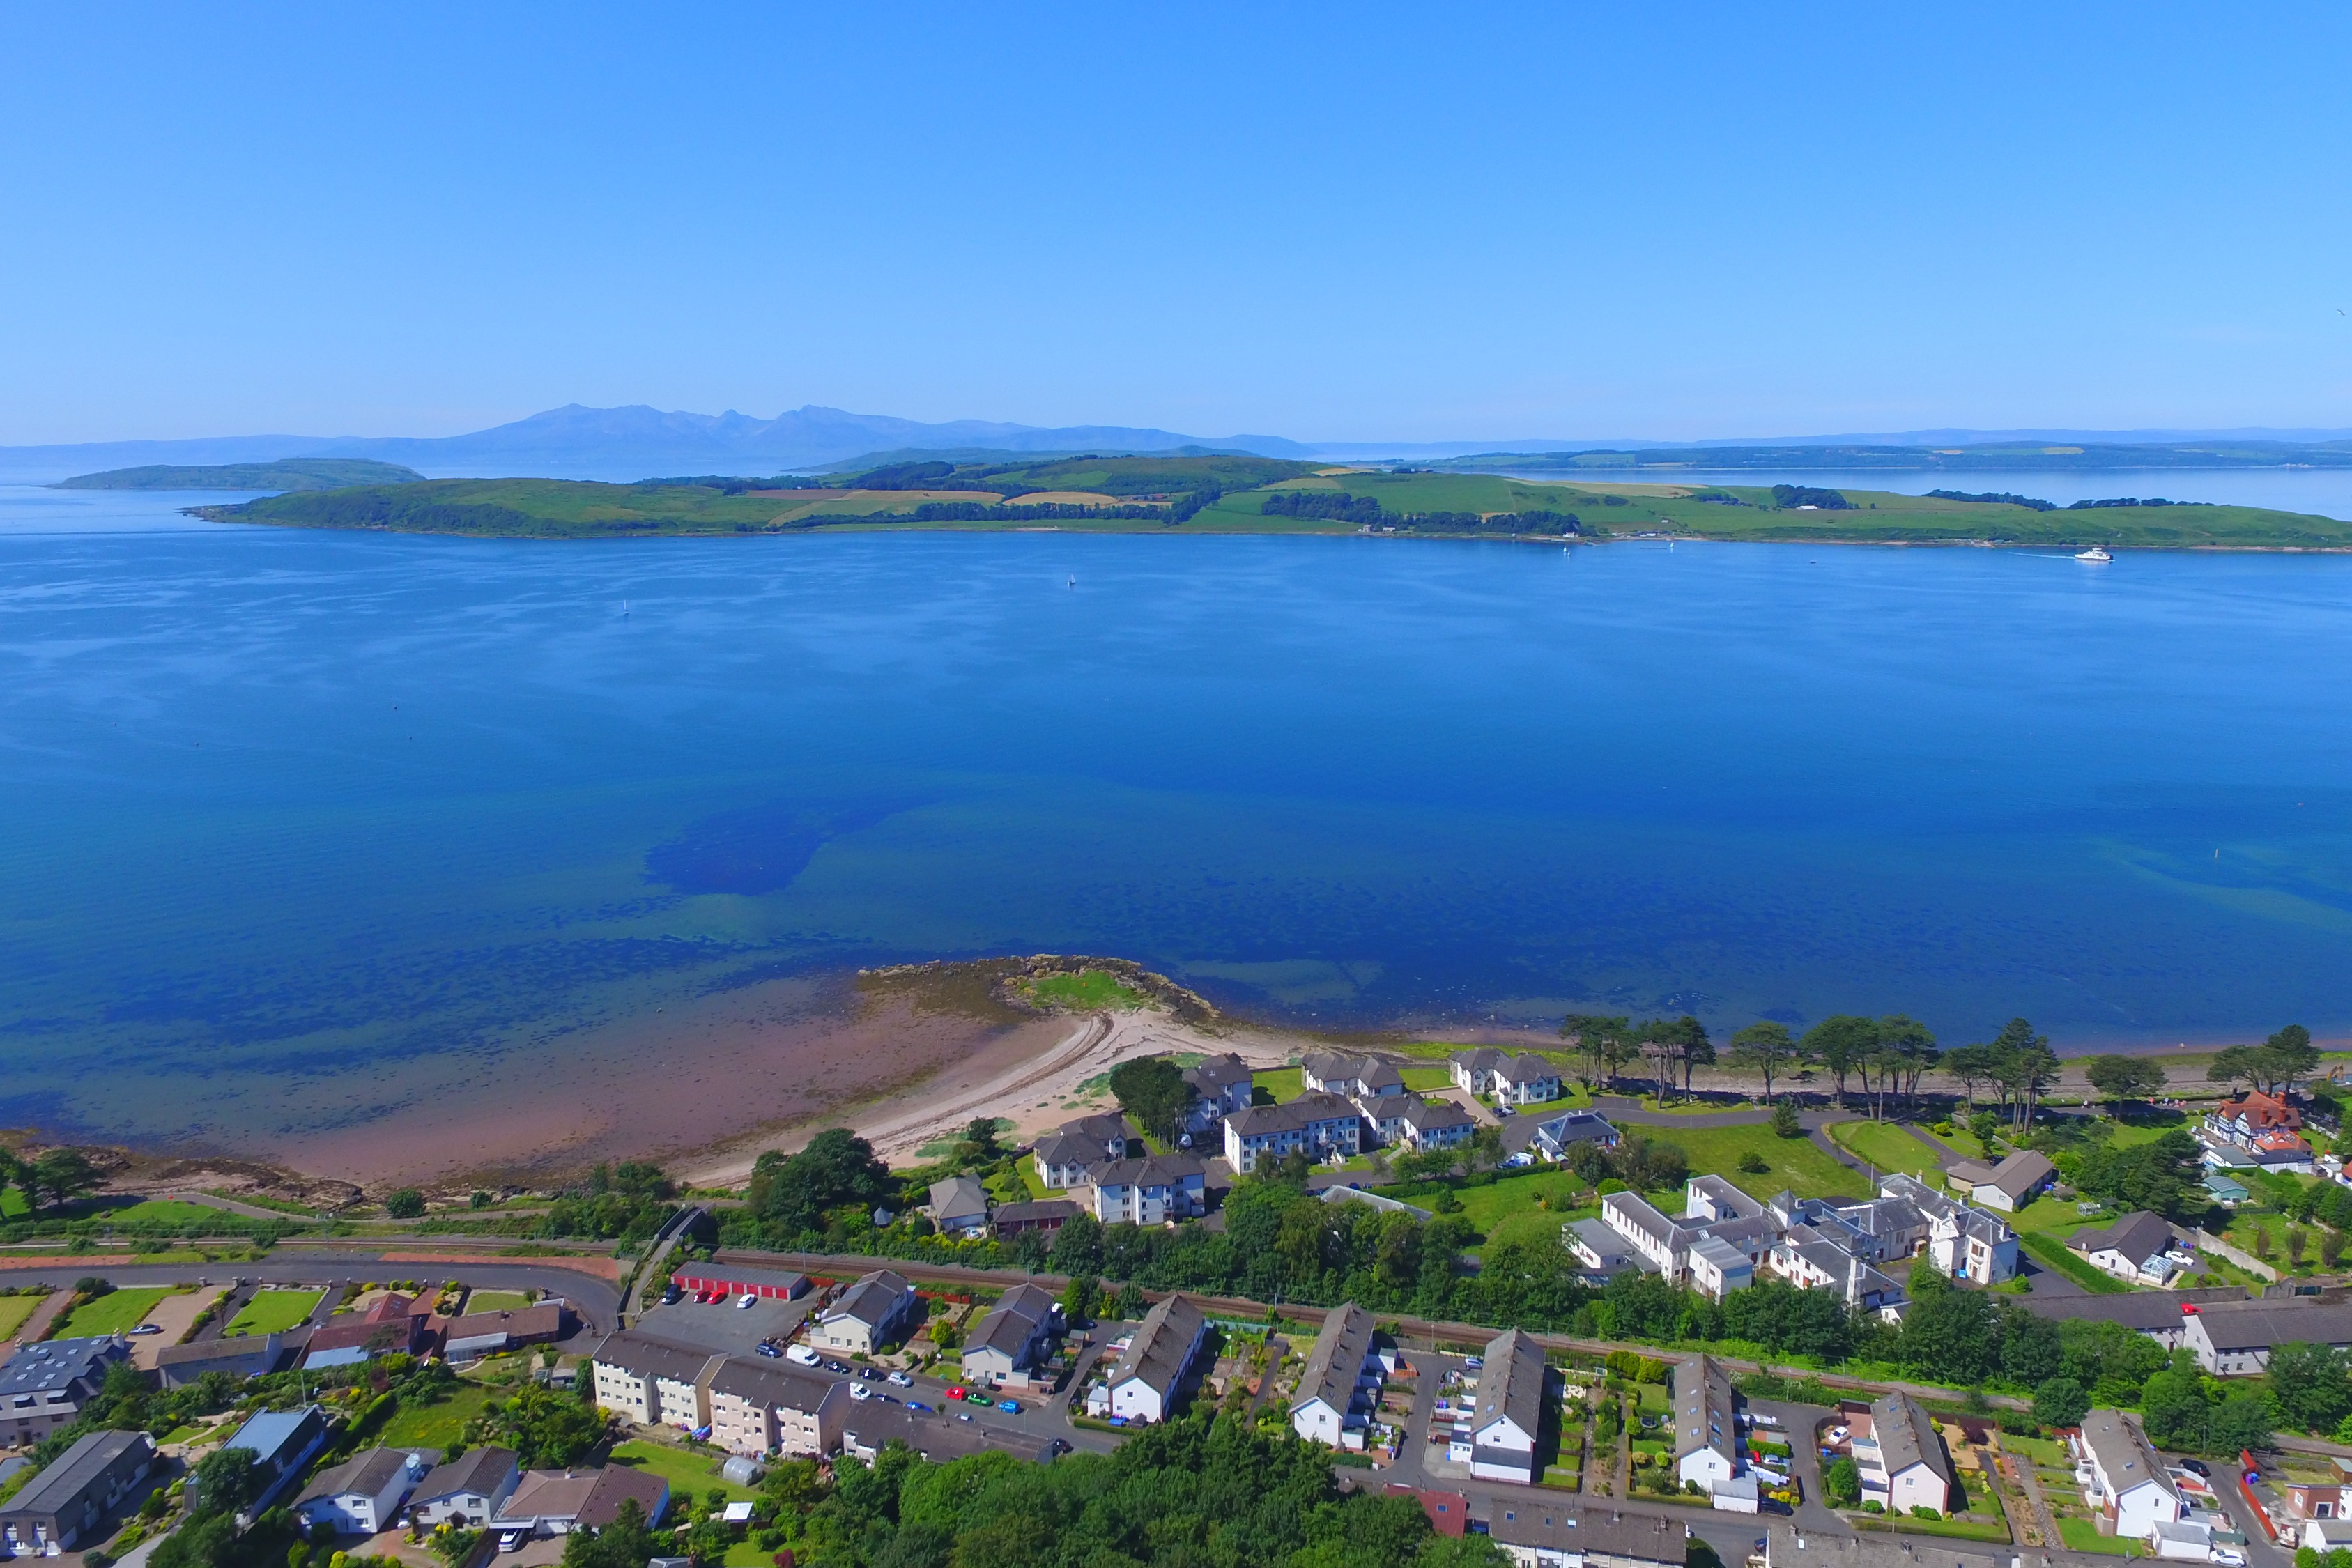 Beautiful view of the Isle of Cumbrae and the Isle of Arran